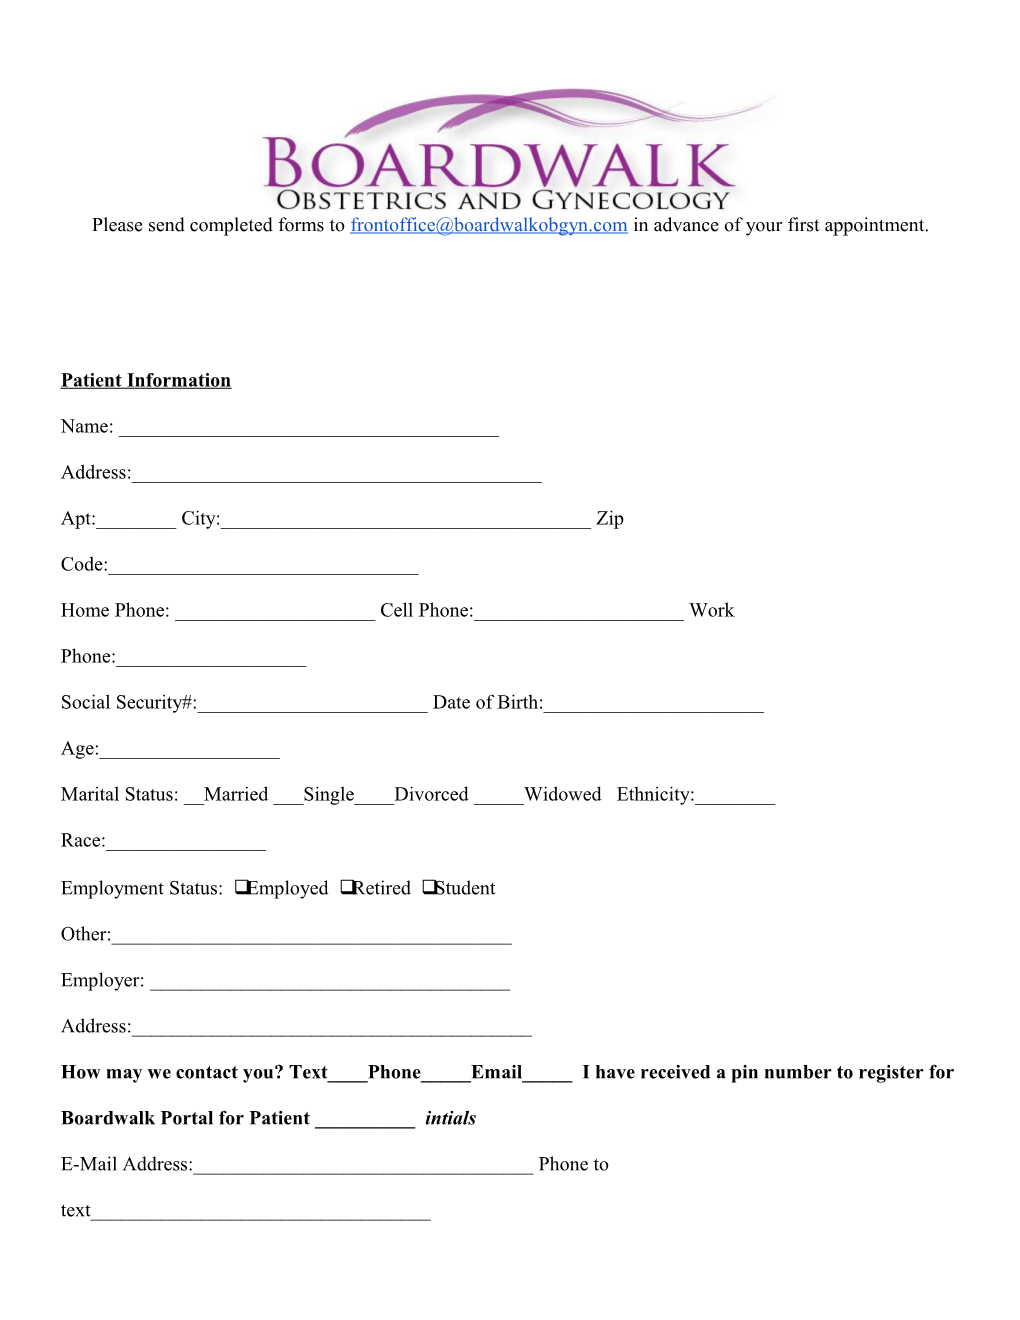 Please Send Completed Forms to in Advance of Your First Appointment